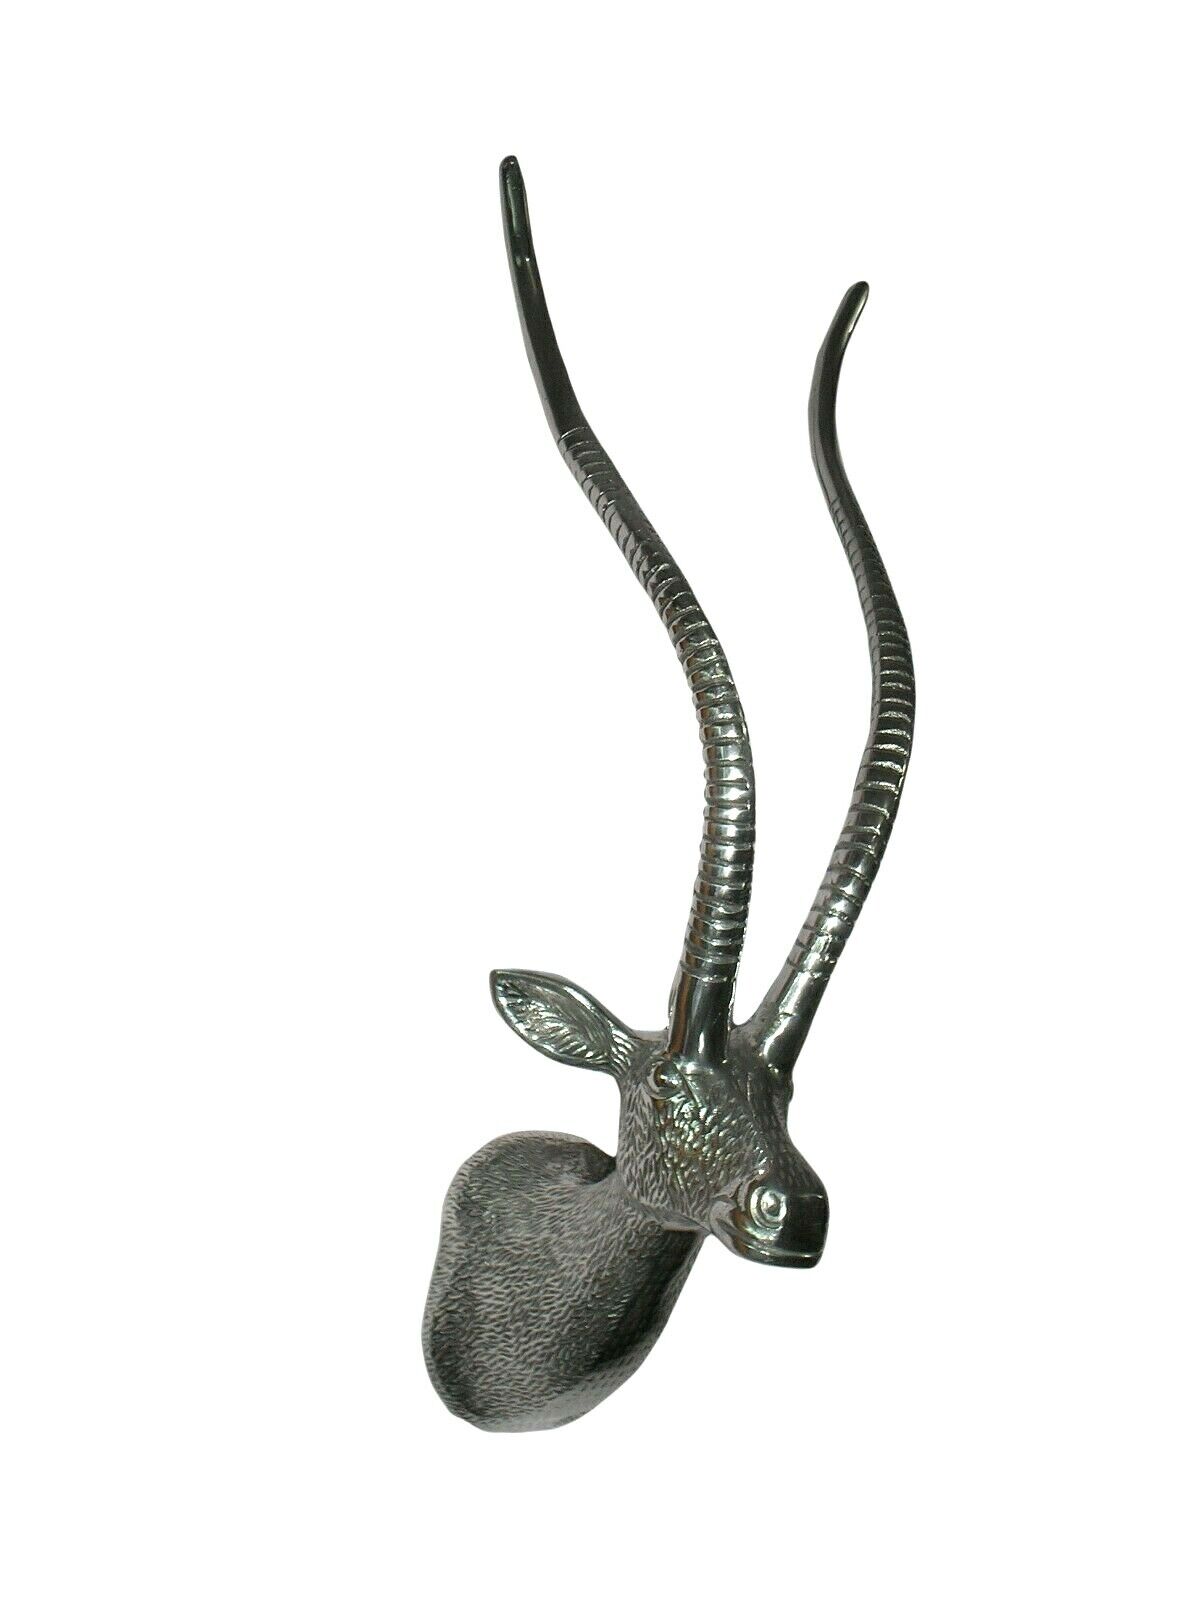 Polished Metal Wall Mount Stag Head Gazelle Deer Antelope HOME DECOR 20 inches